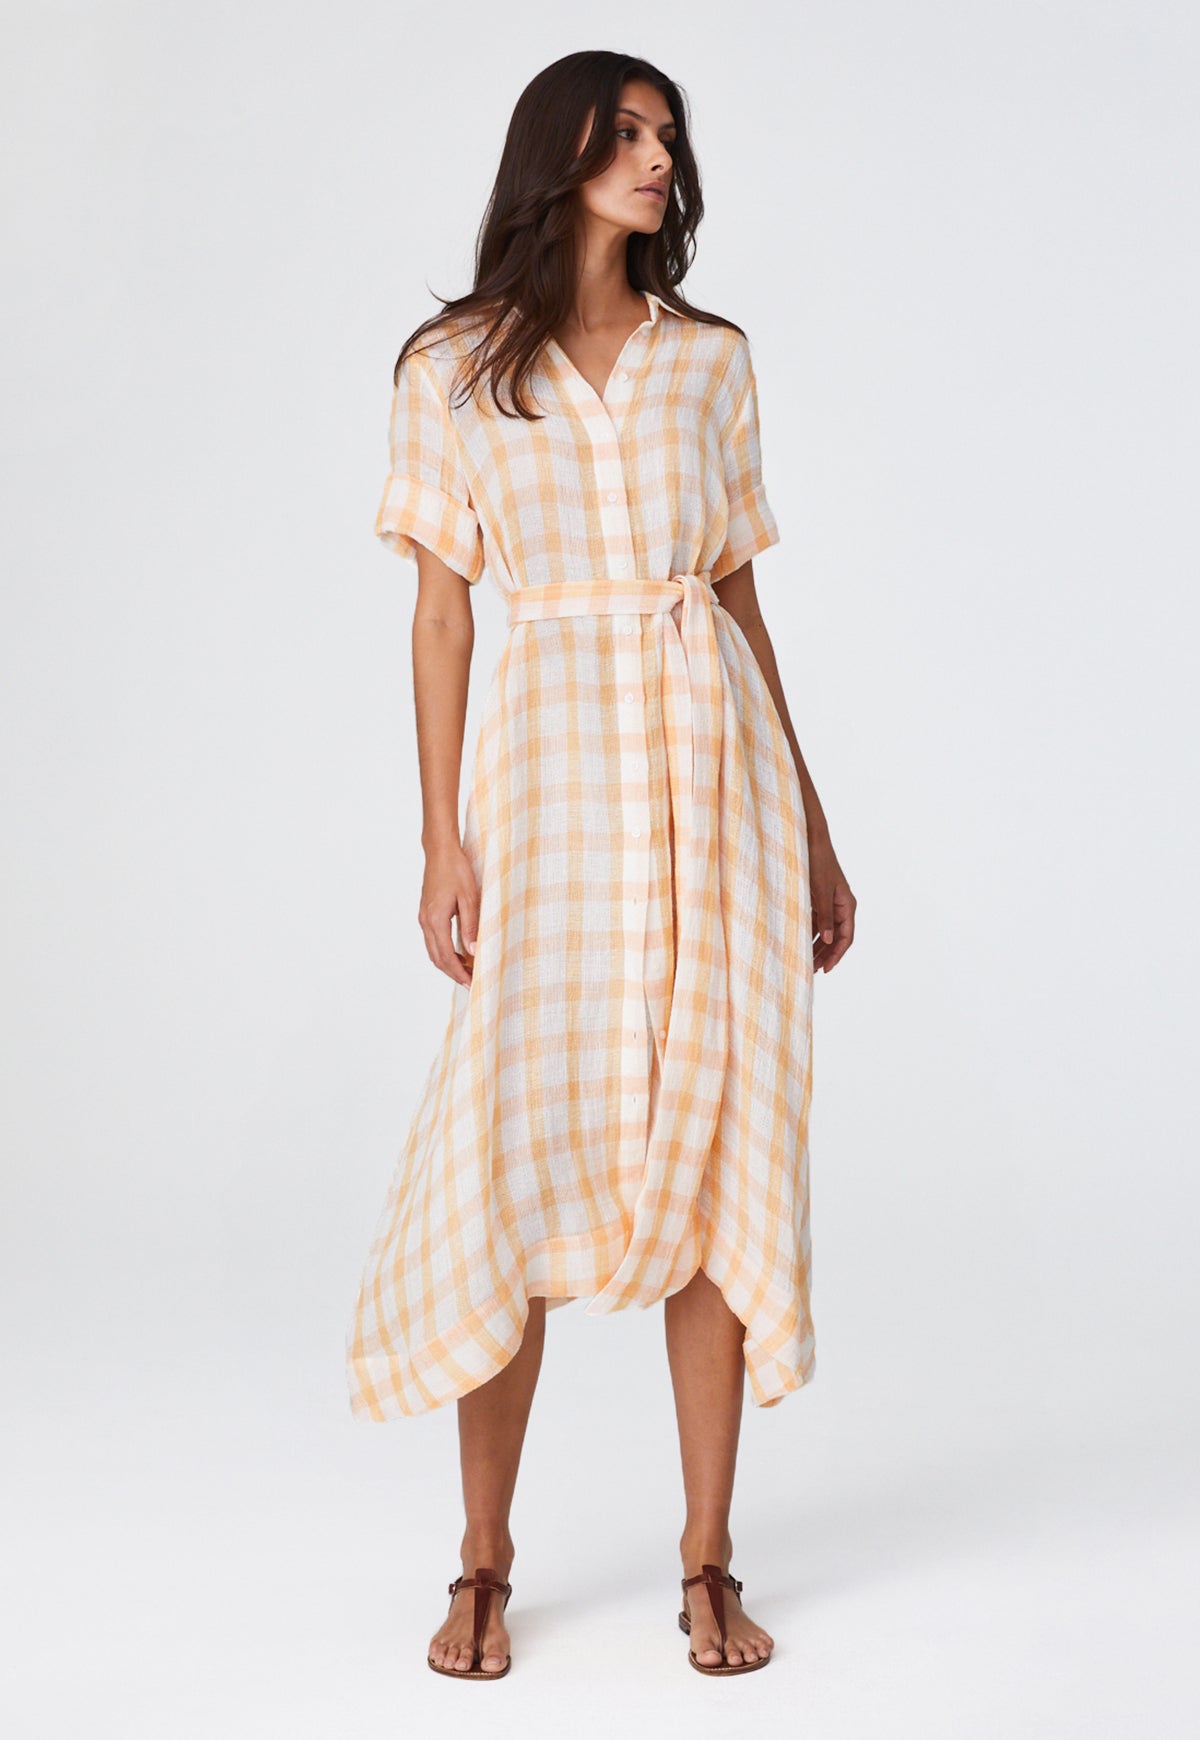 THE CLASSIC SHIRT DRESS in PEACHY TANGERINE GINGHAM CHIOS GAUZE